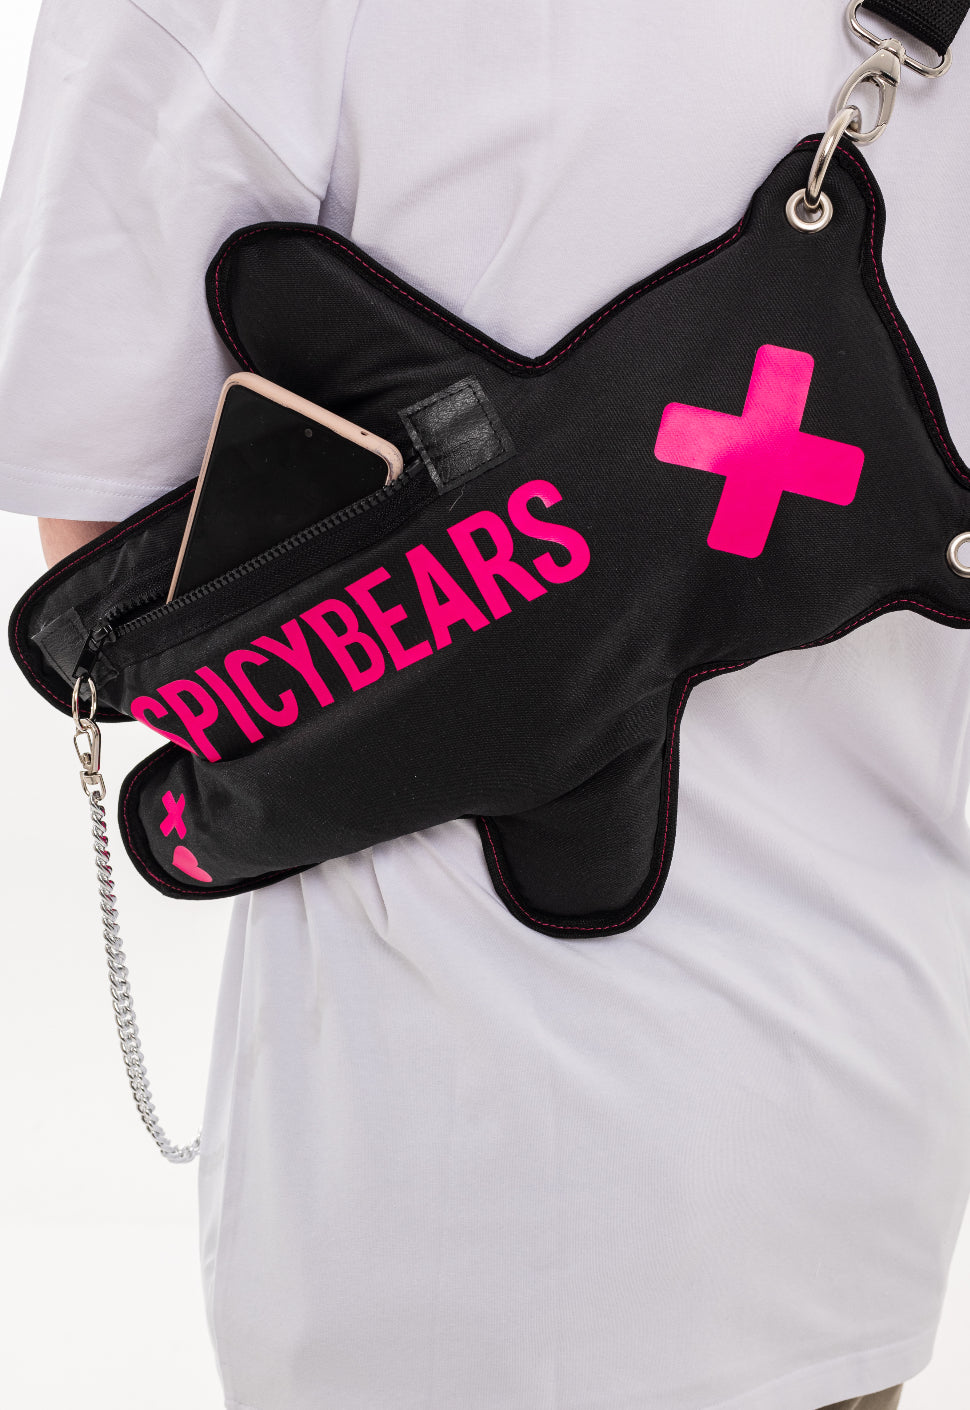 "SPICYBEARS Bag with Roomy Pockets ": With two zippered pockets and a spacious back patch pocket, this bag has plenty of room for all your essentials, making it perfect for everyday wear